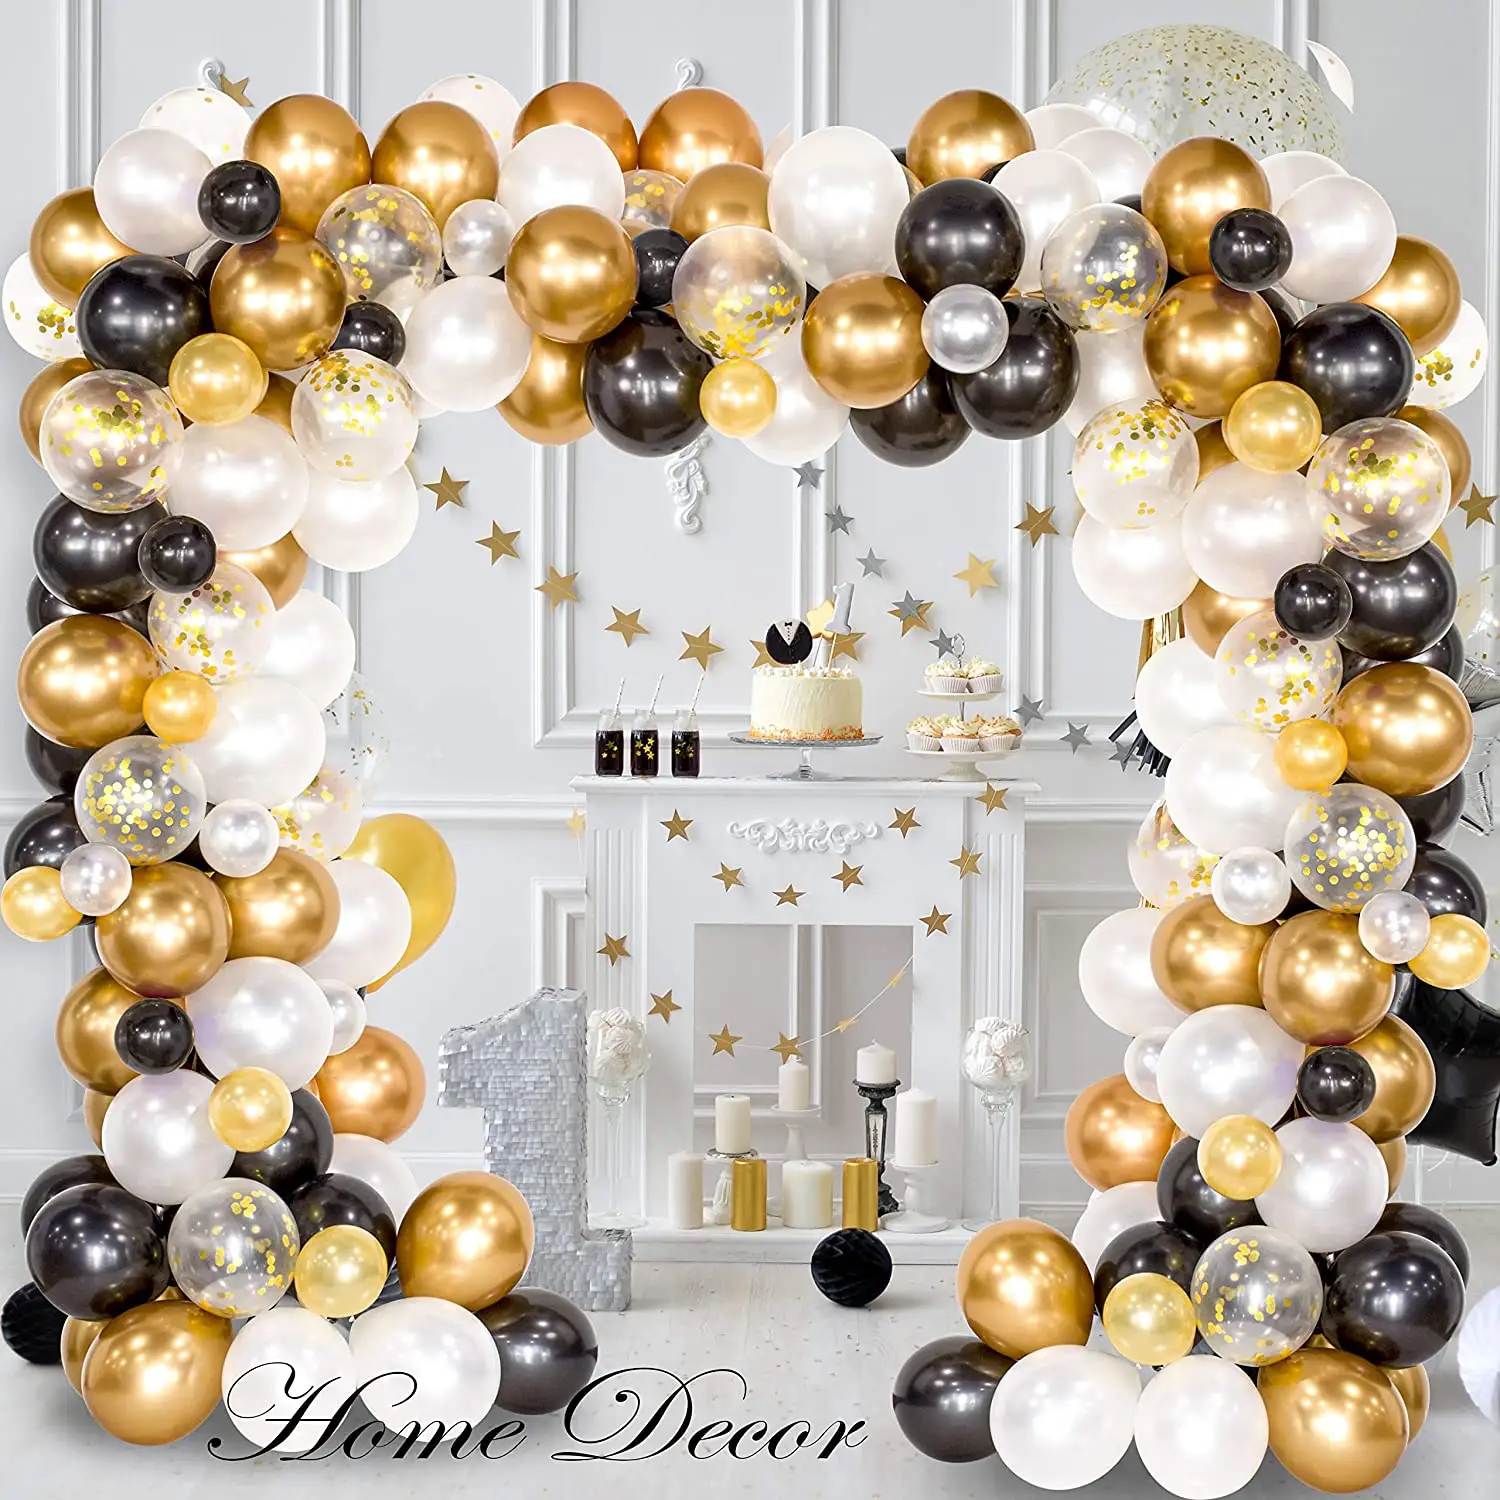 Party Decoration Birthday PARTYCOOL Black Gold Birthday Party Decor Balloon Arch Kit Bases Globos Birthday Wedding Party Supplies Balloons Garland Arch